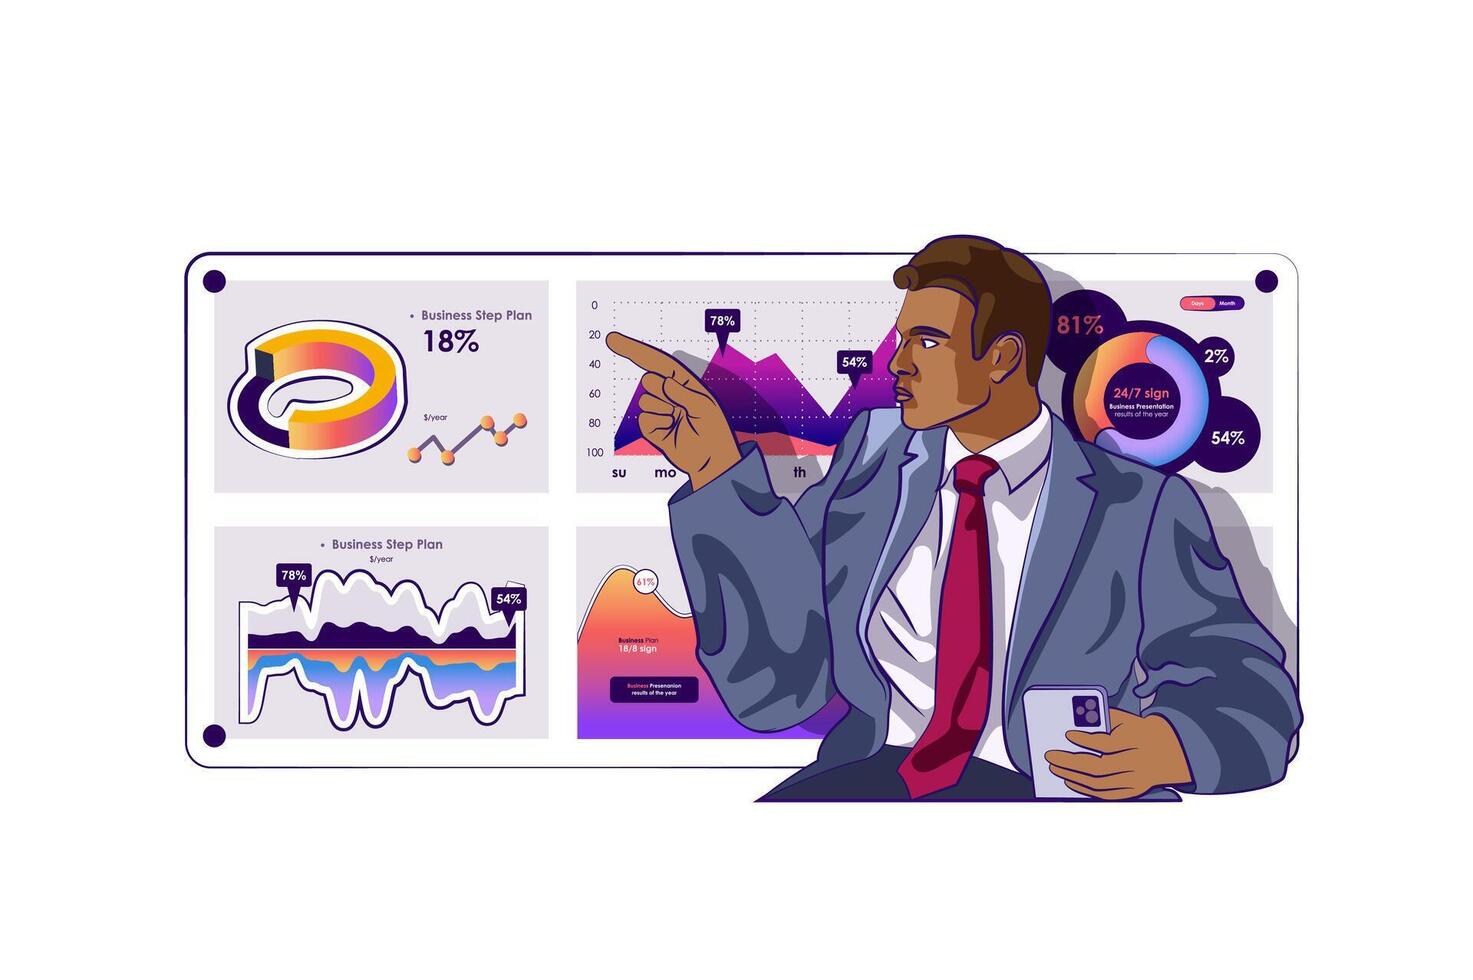 Business plan concept with people scene in flat cartoon design for web. Businessman analyzing financial data and creating strategy. Vector illustration for social media banner, marketing material.